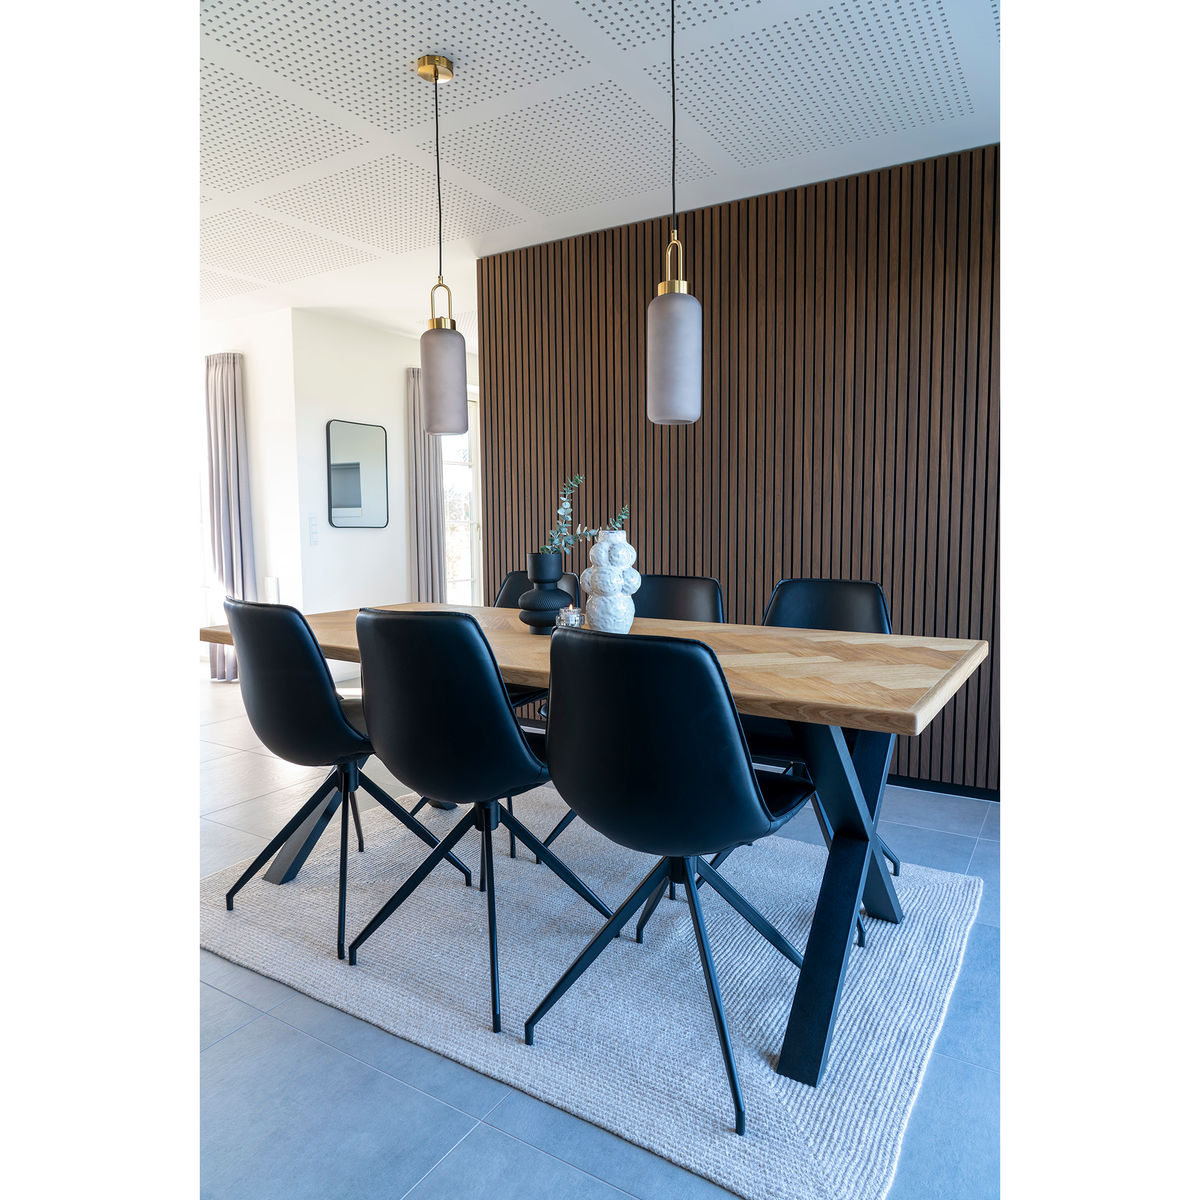 House Nordic - Bordeaux Dining Table